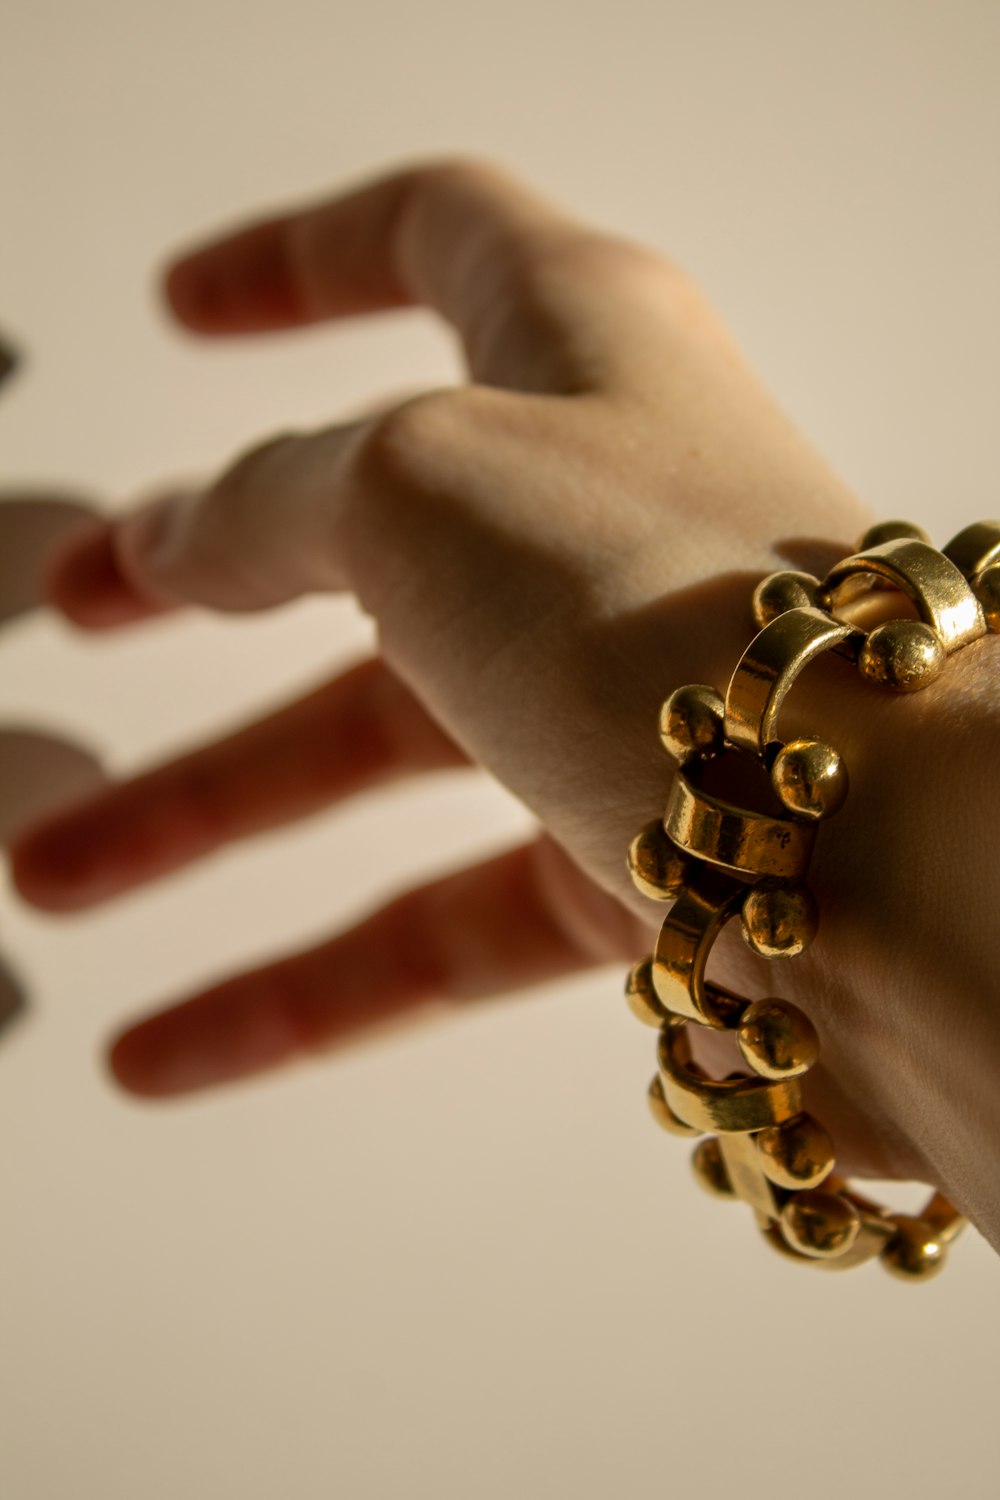 gold beaded bracelet on persons hand